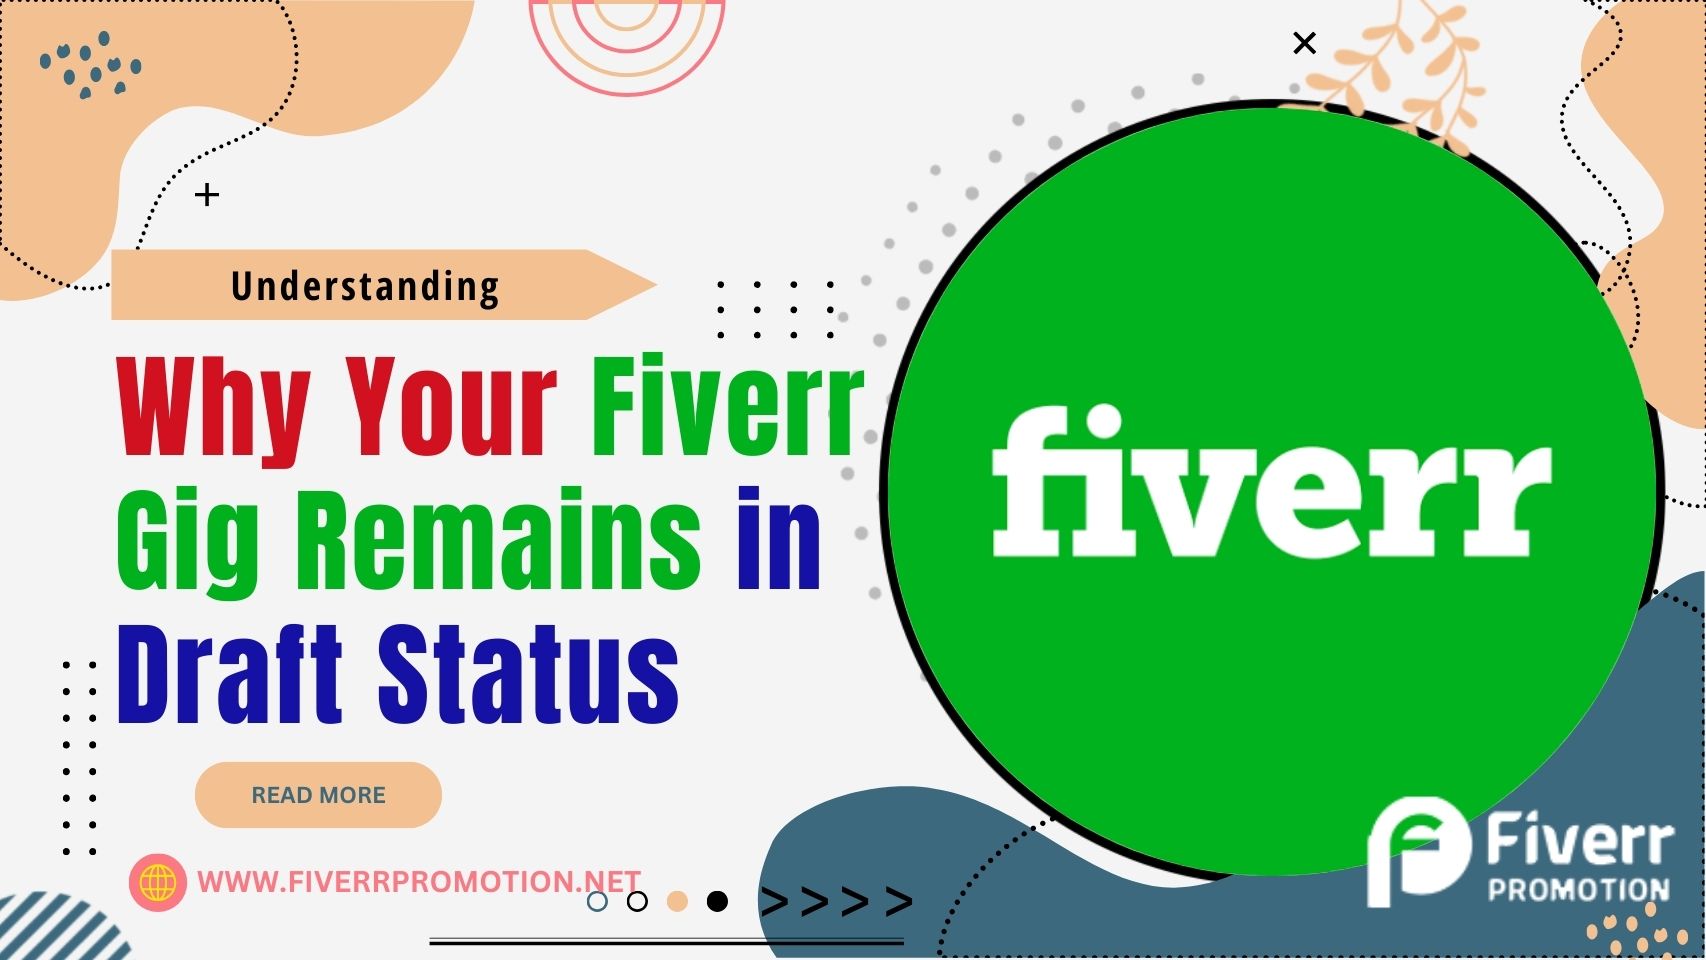 Understanding Why Your Fiverr Gig Remains in Draft Status